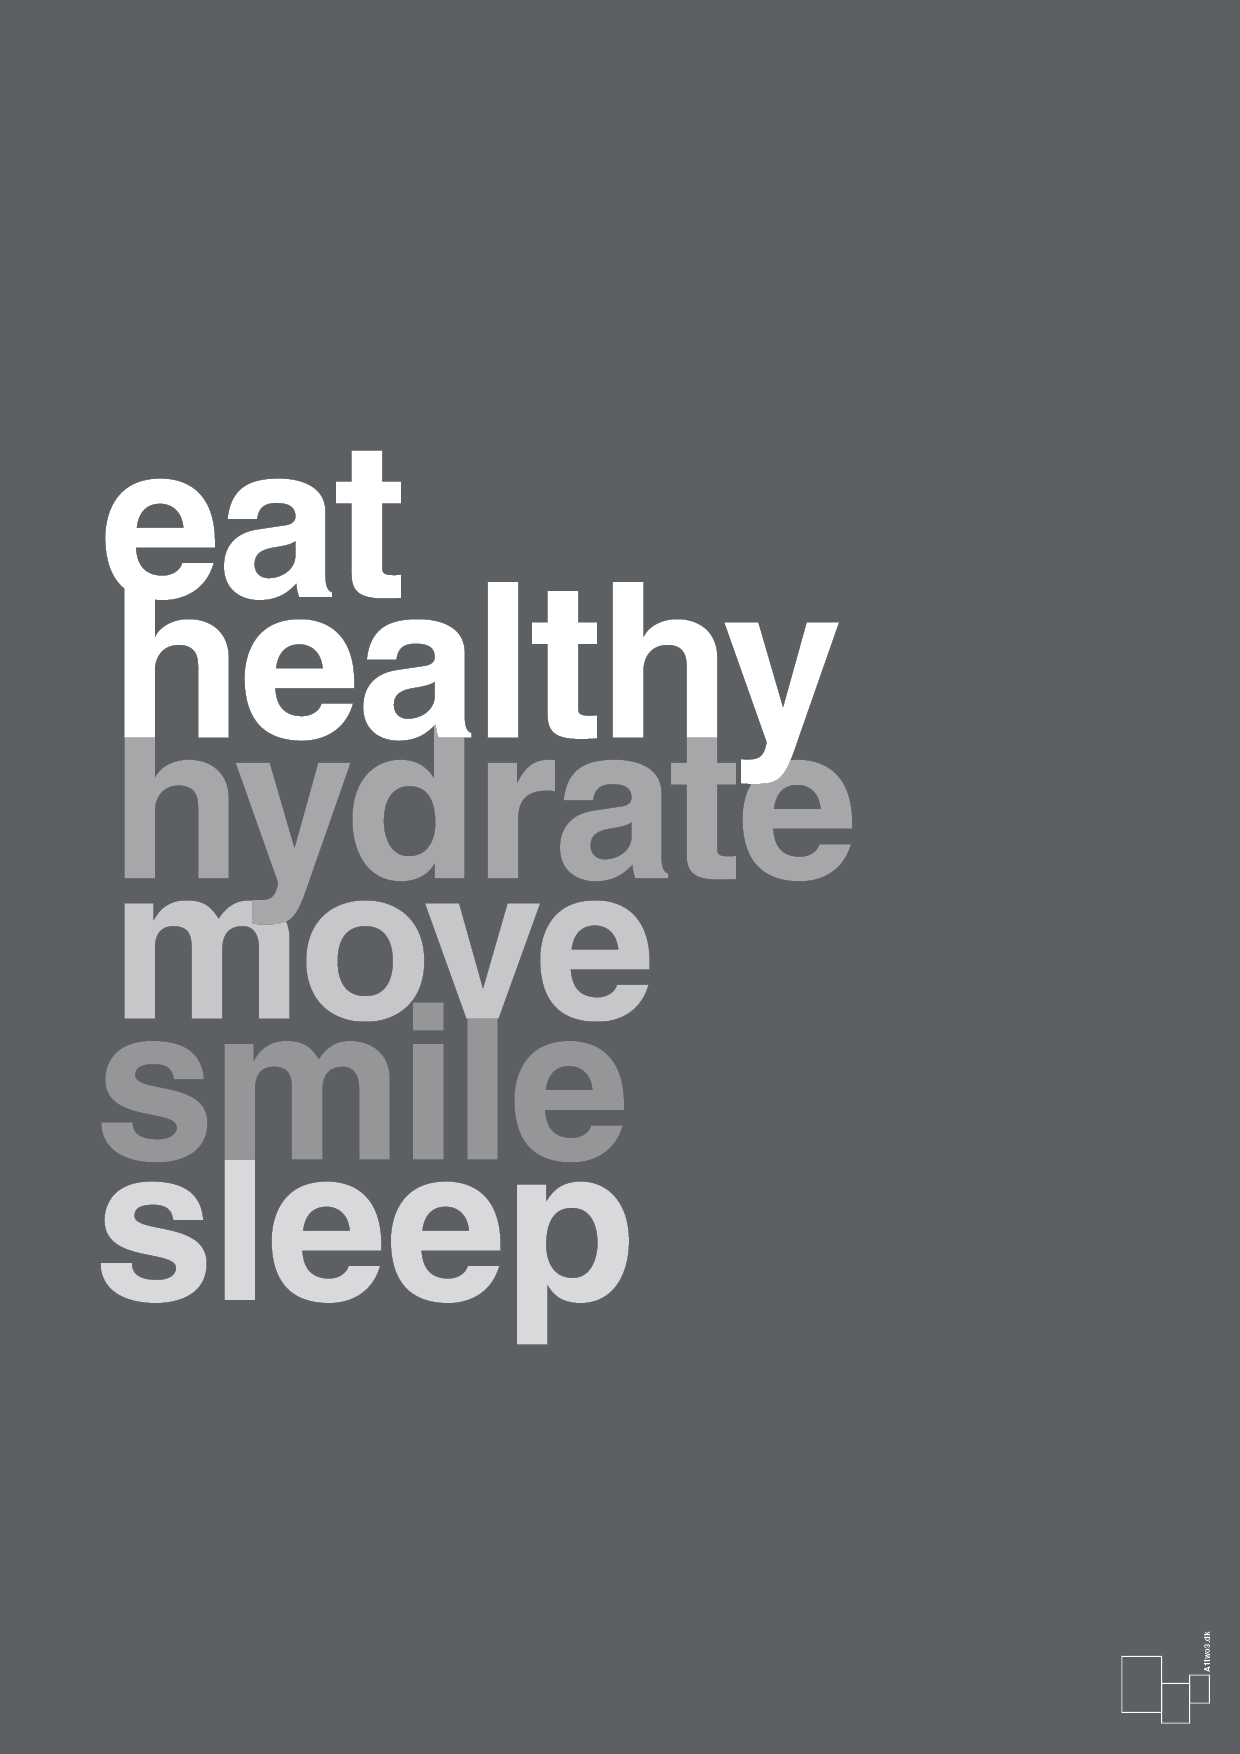 eat healthy hydrate move smile sleep - Plakat med Ordsprog i Graphic Charcoal